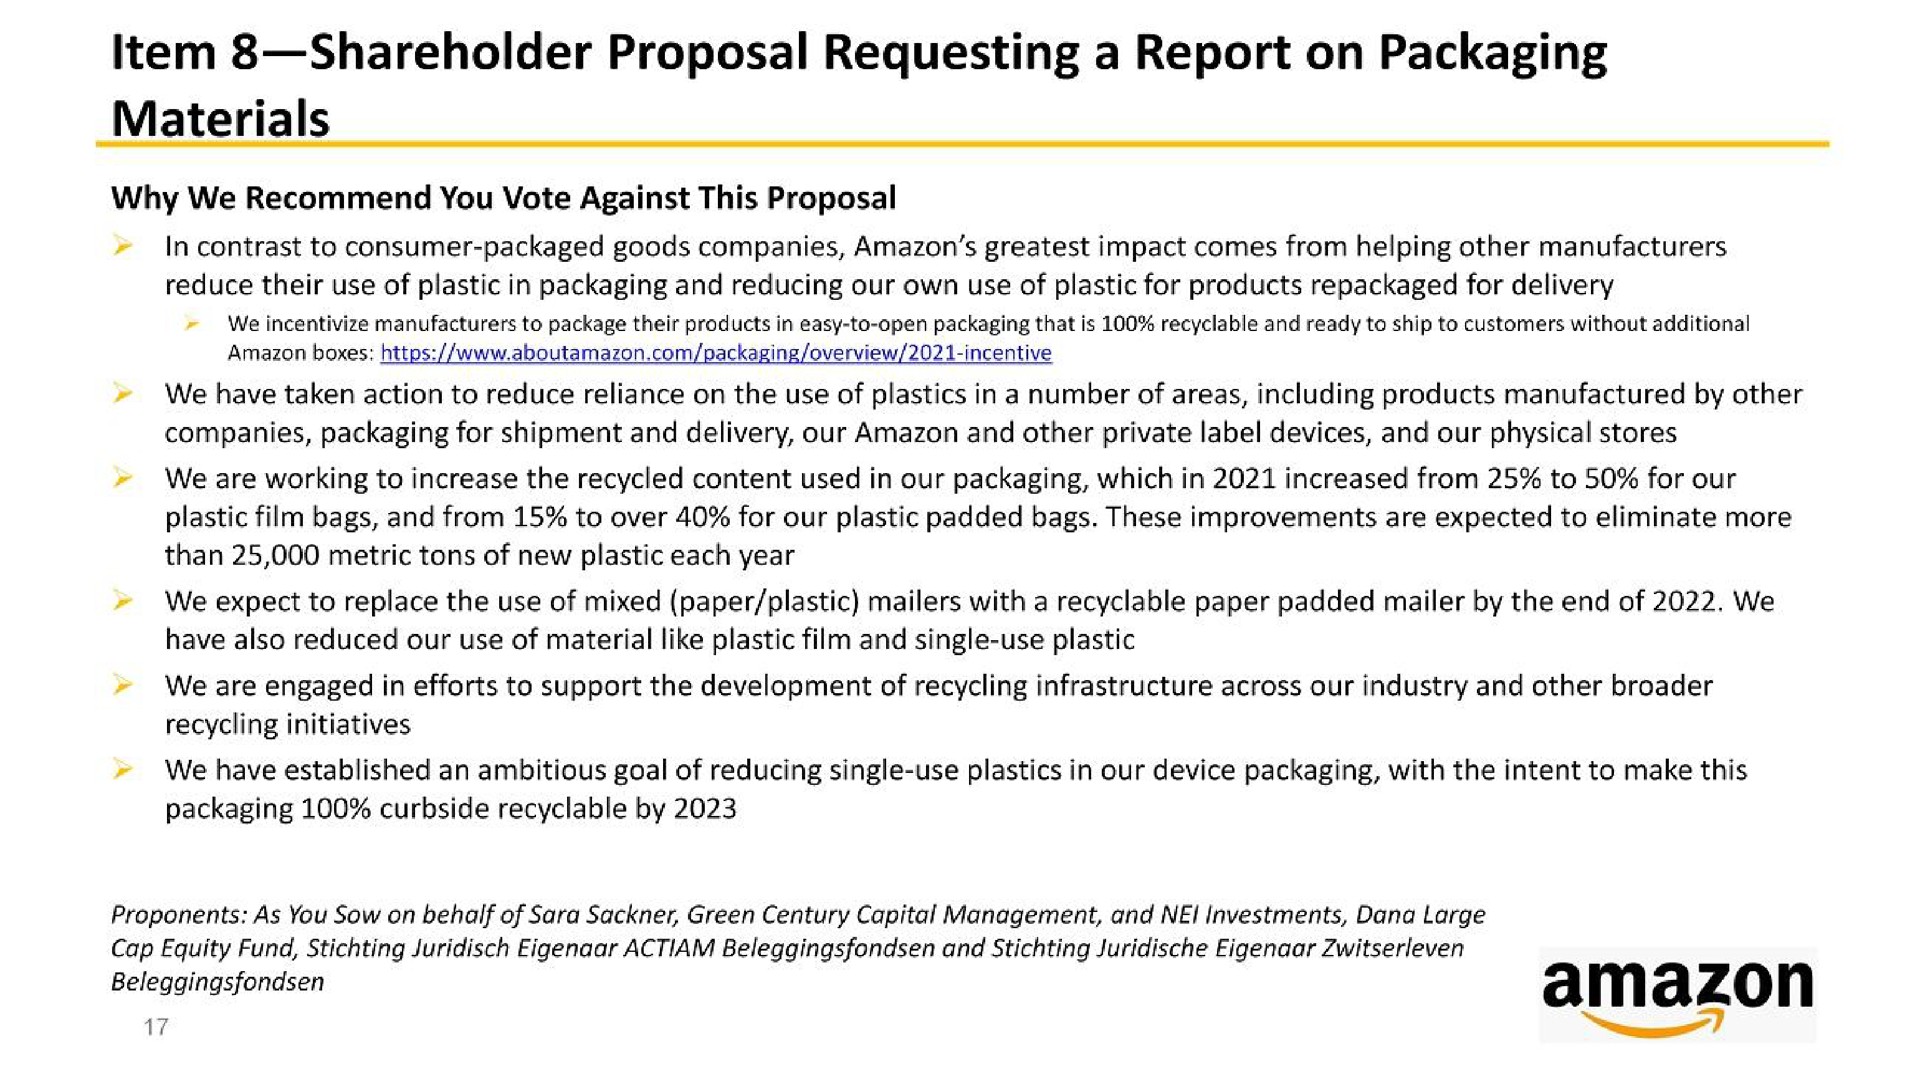 item shareholder proposal requesting a report on packaging materials | Amazon